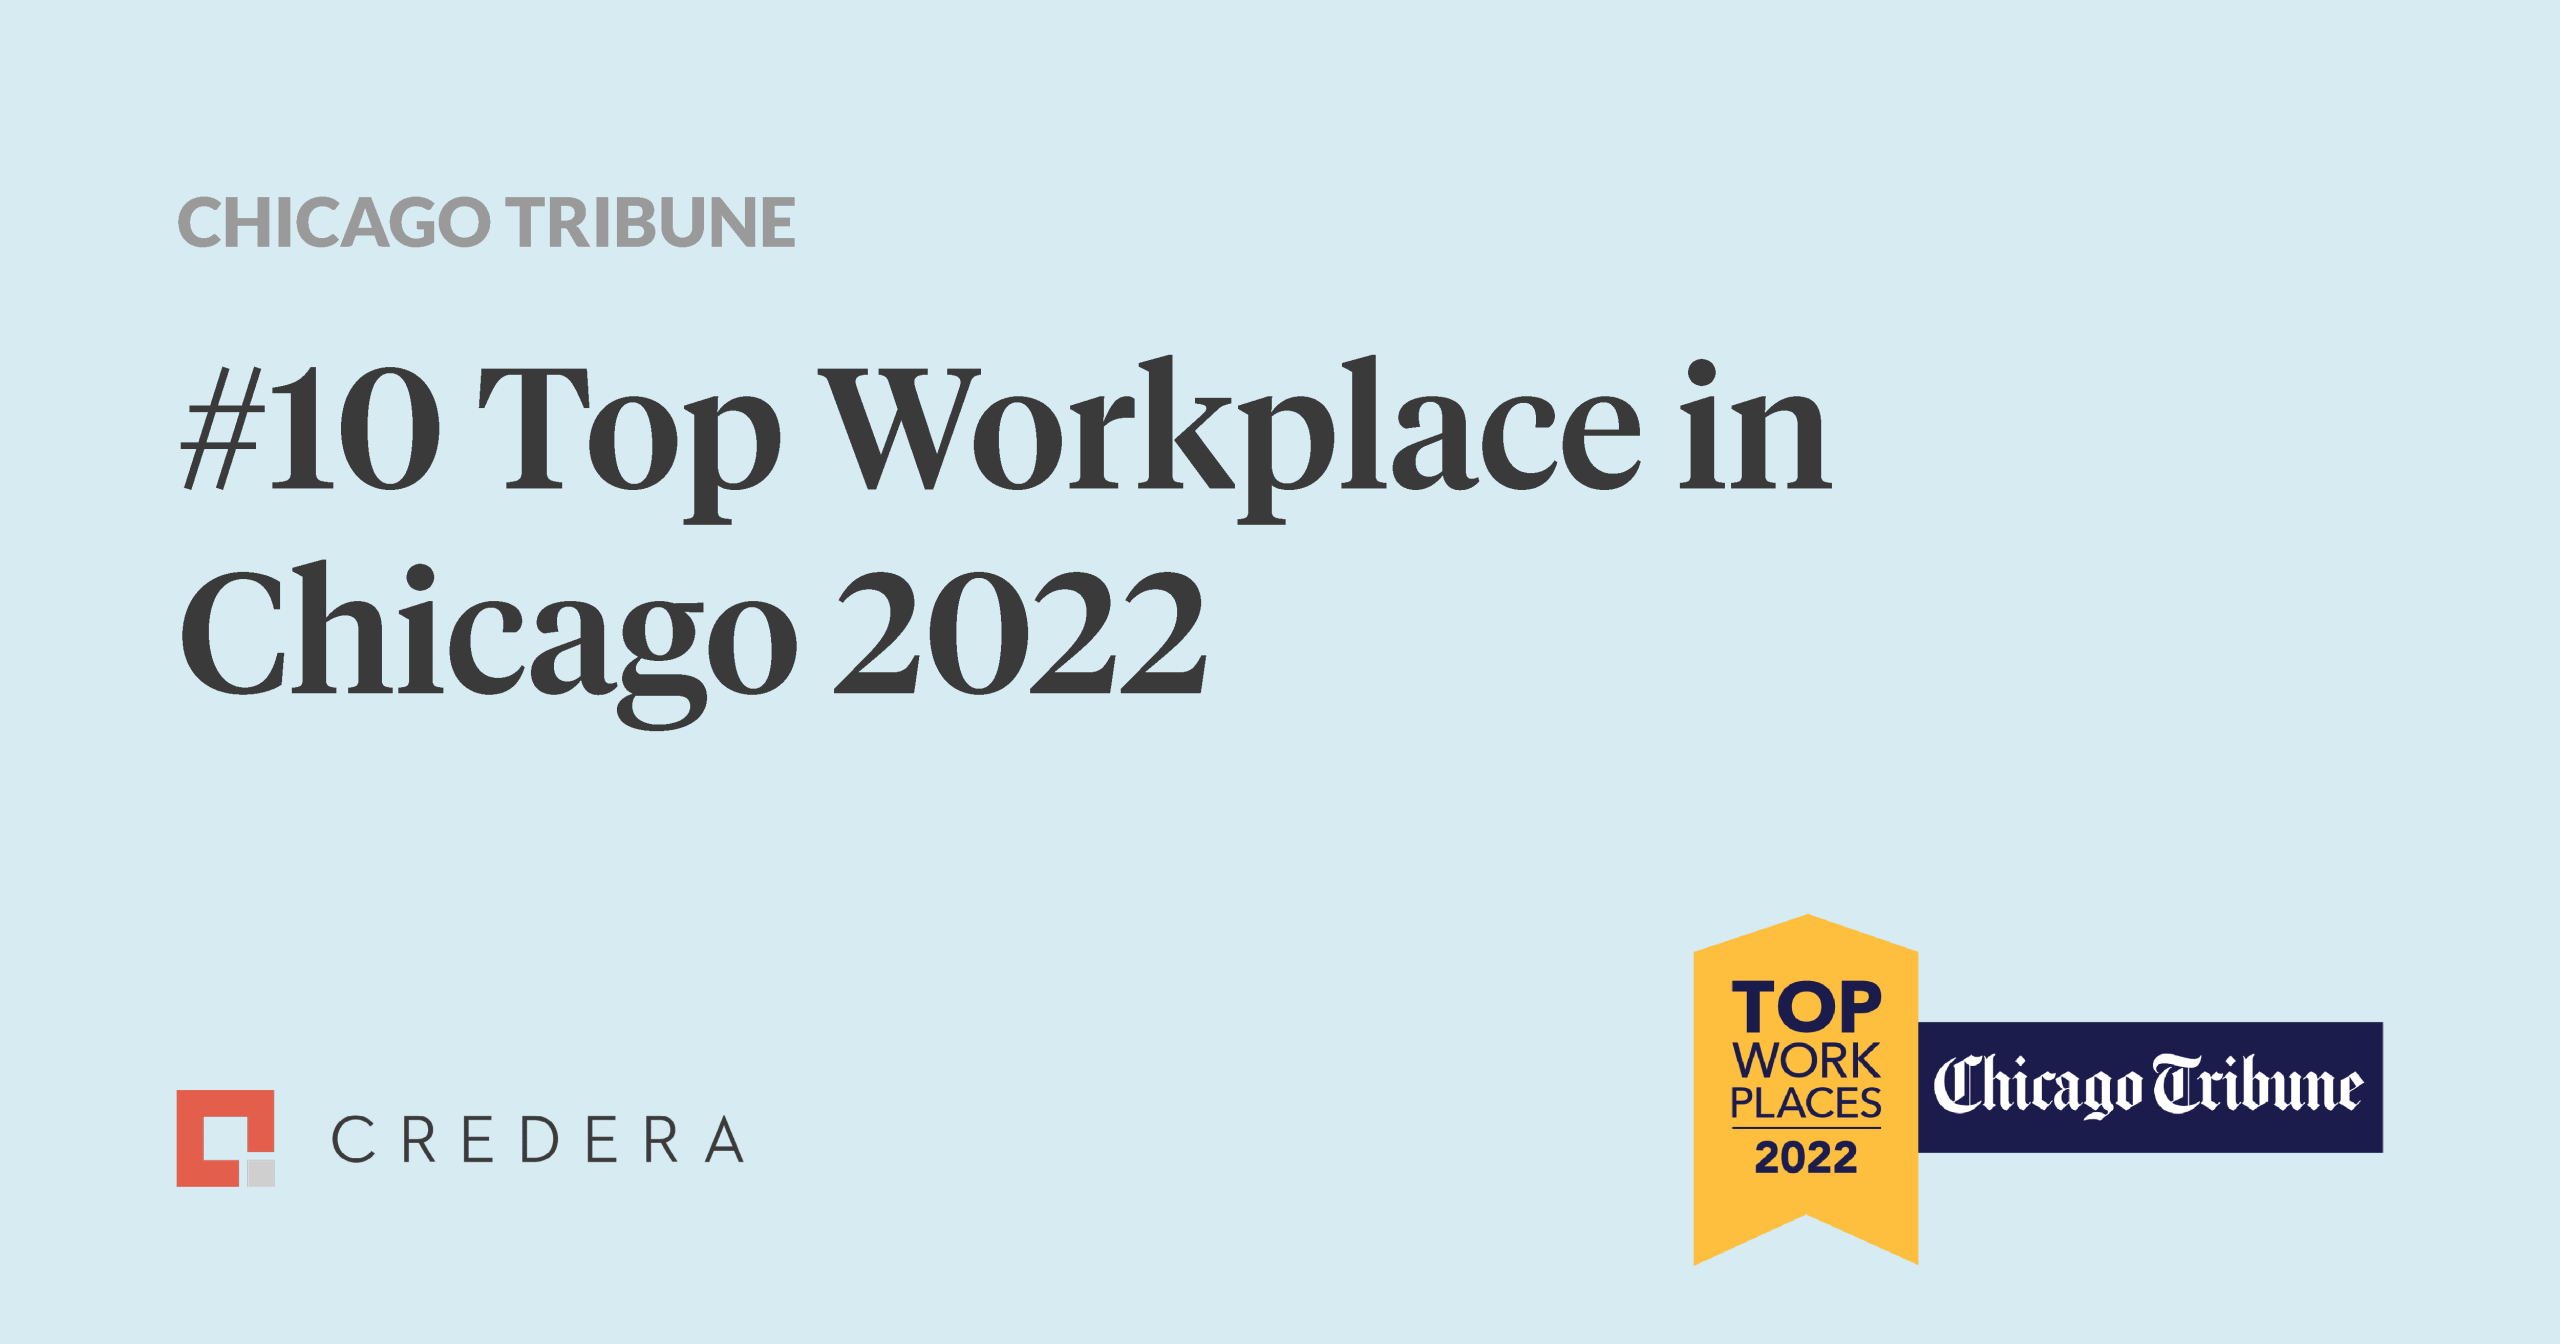 Credera Named #10 Top Workplace in Chicago for Its First Qualifying Year